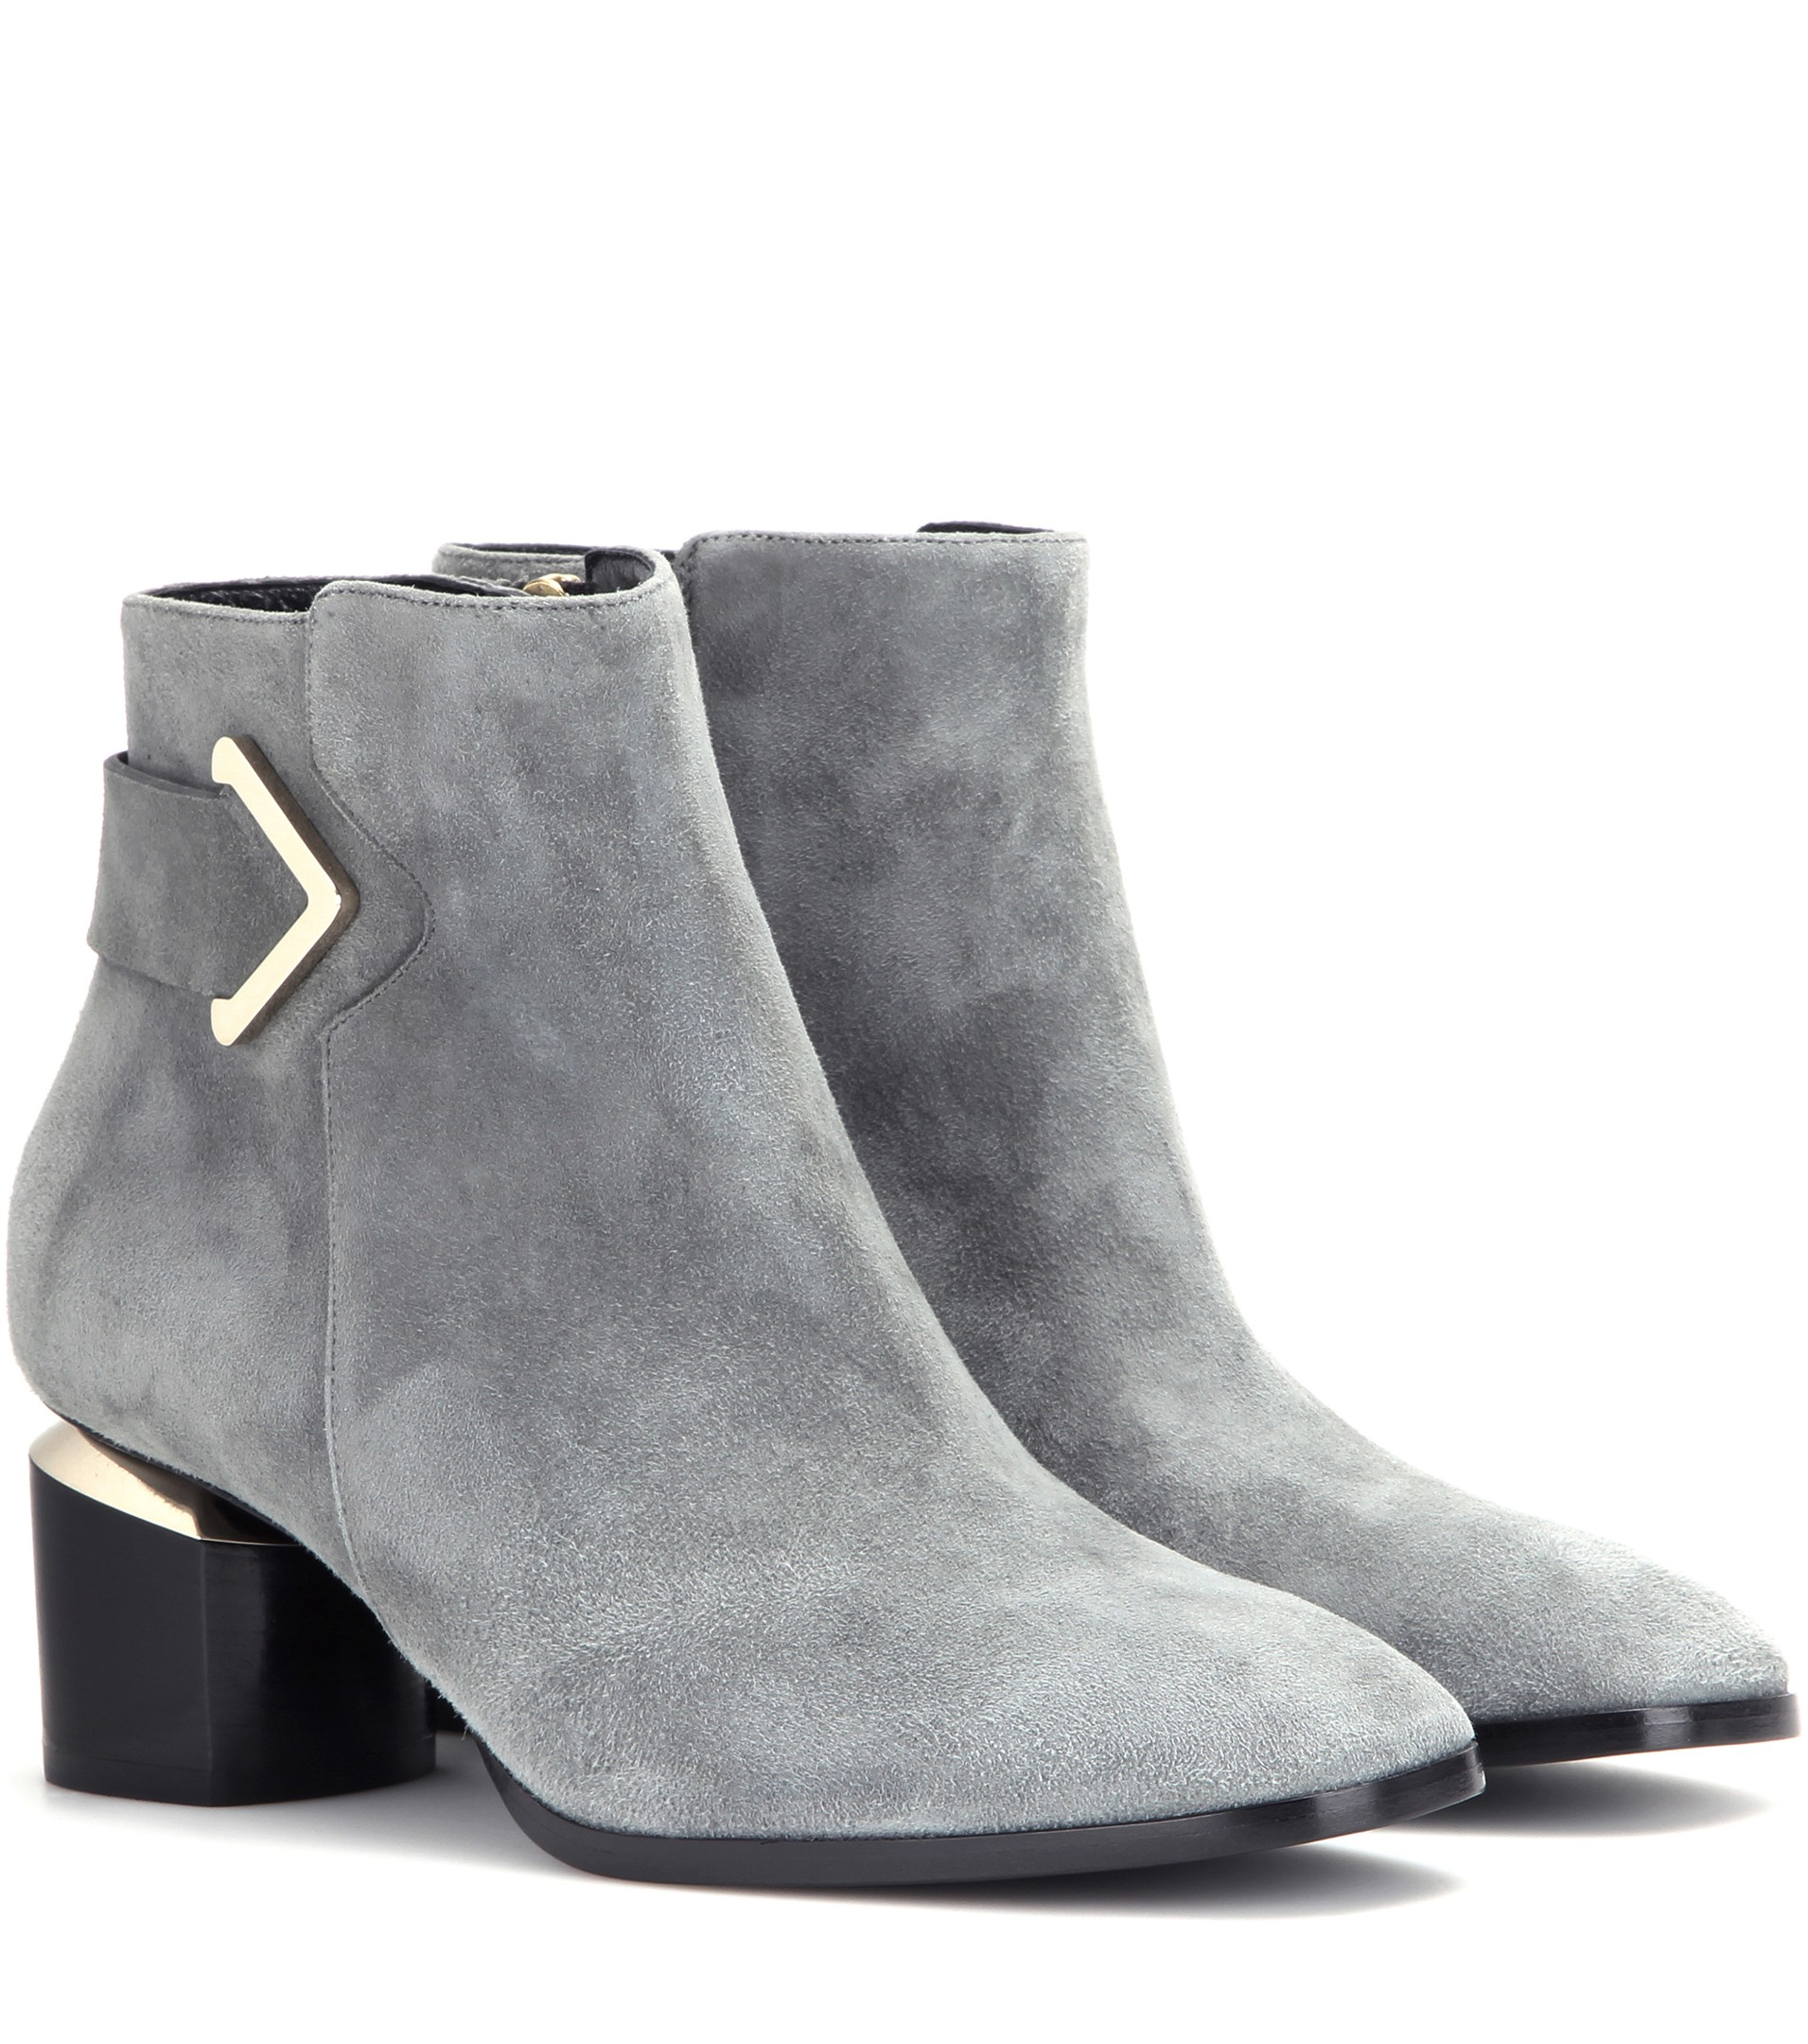 Nicholas kirkwood Brannagh Suede Ankle Boots in Gray | Lyst